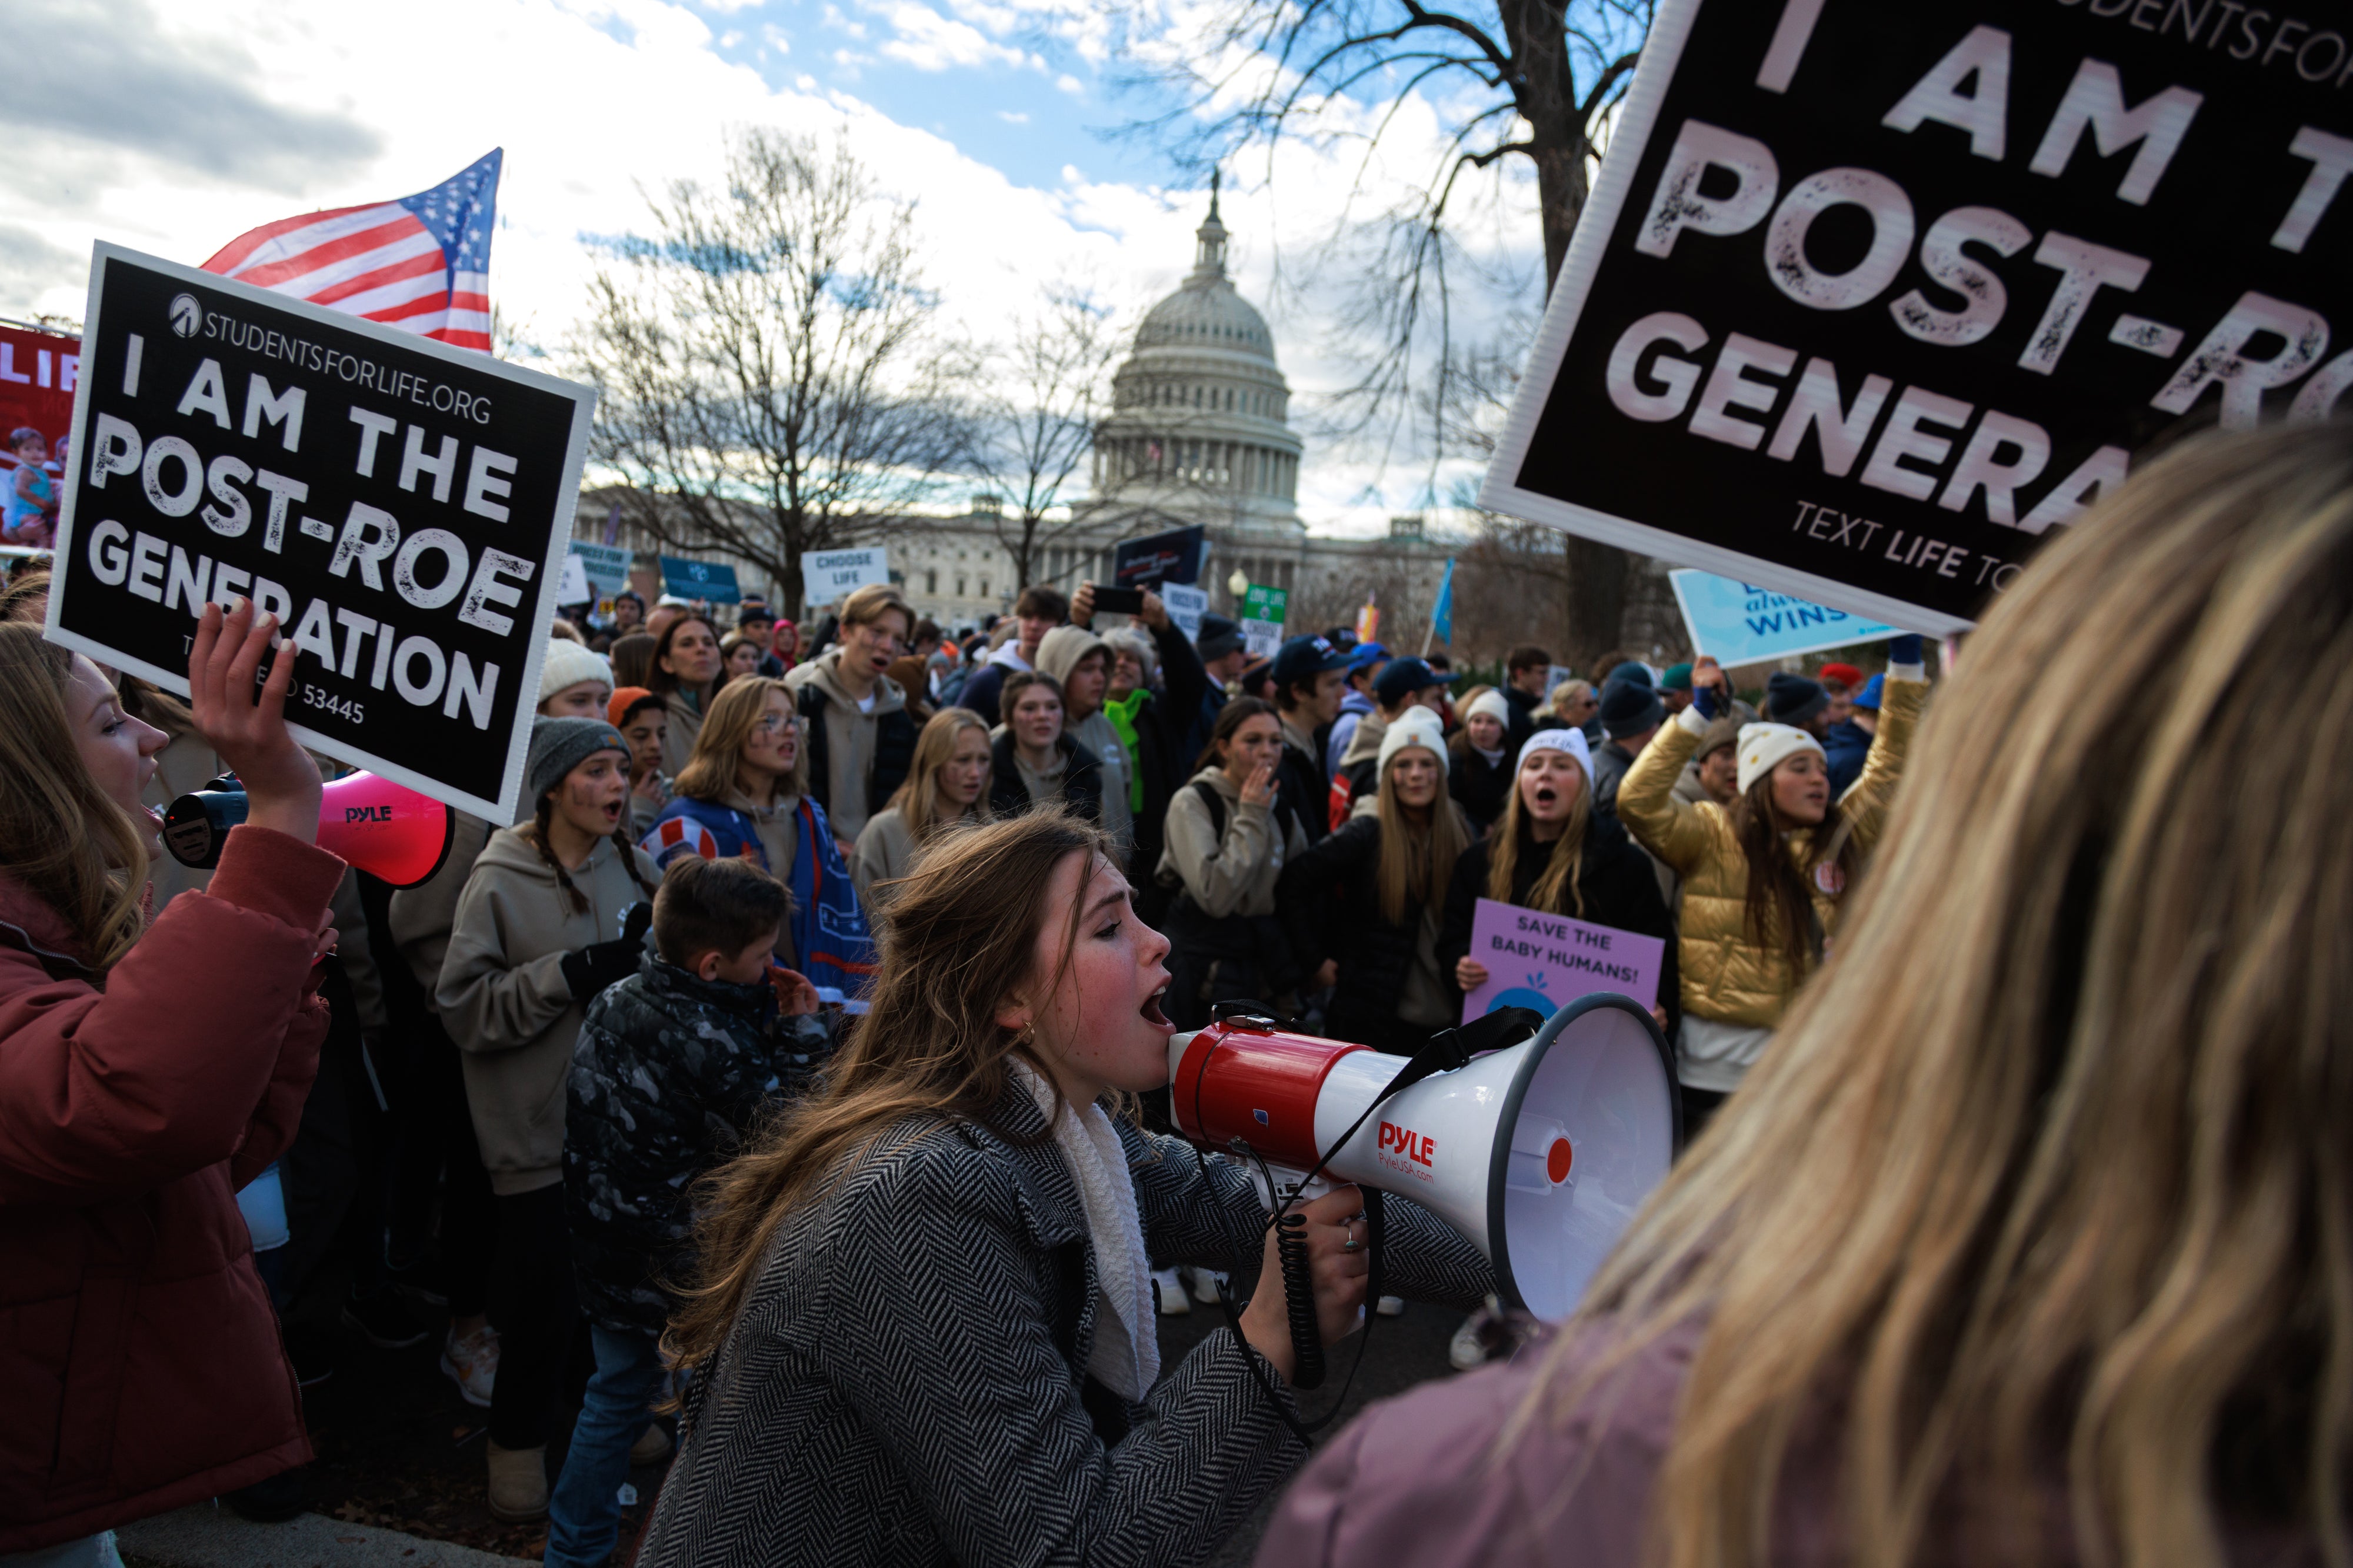 A woman shouts into a megaphone amidst a crowd of protesters carrying anti-abortion signs in front of the U.S. Capitol.